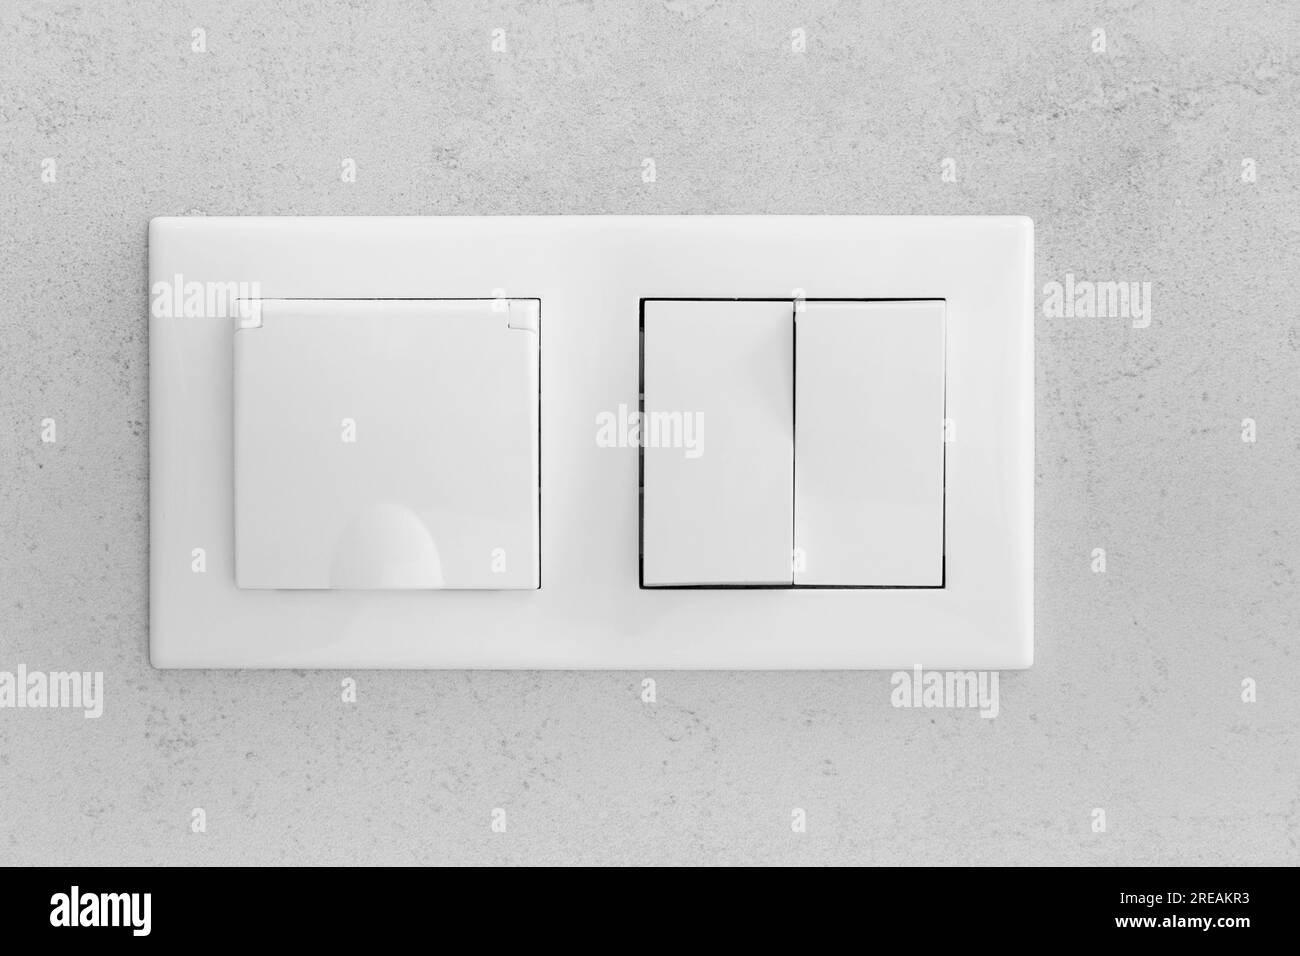 Closed socket and switch on porcelain stoneware in the bathroom Stock Photo